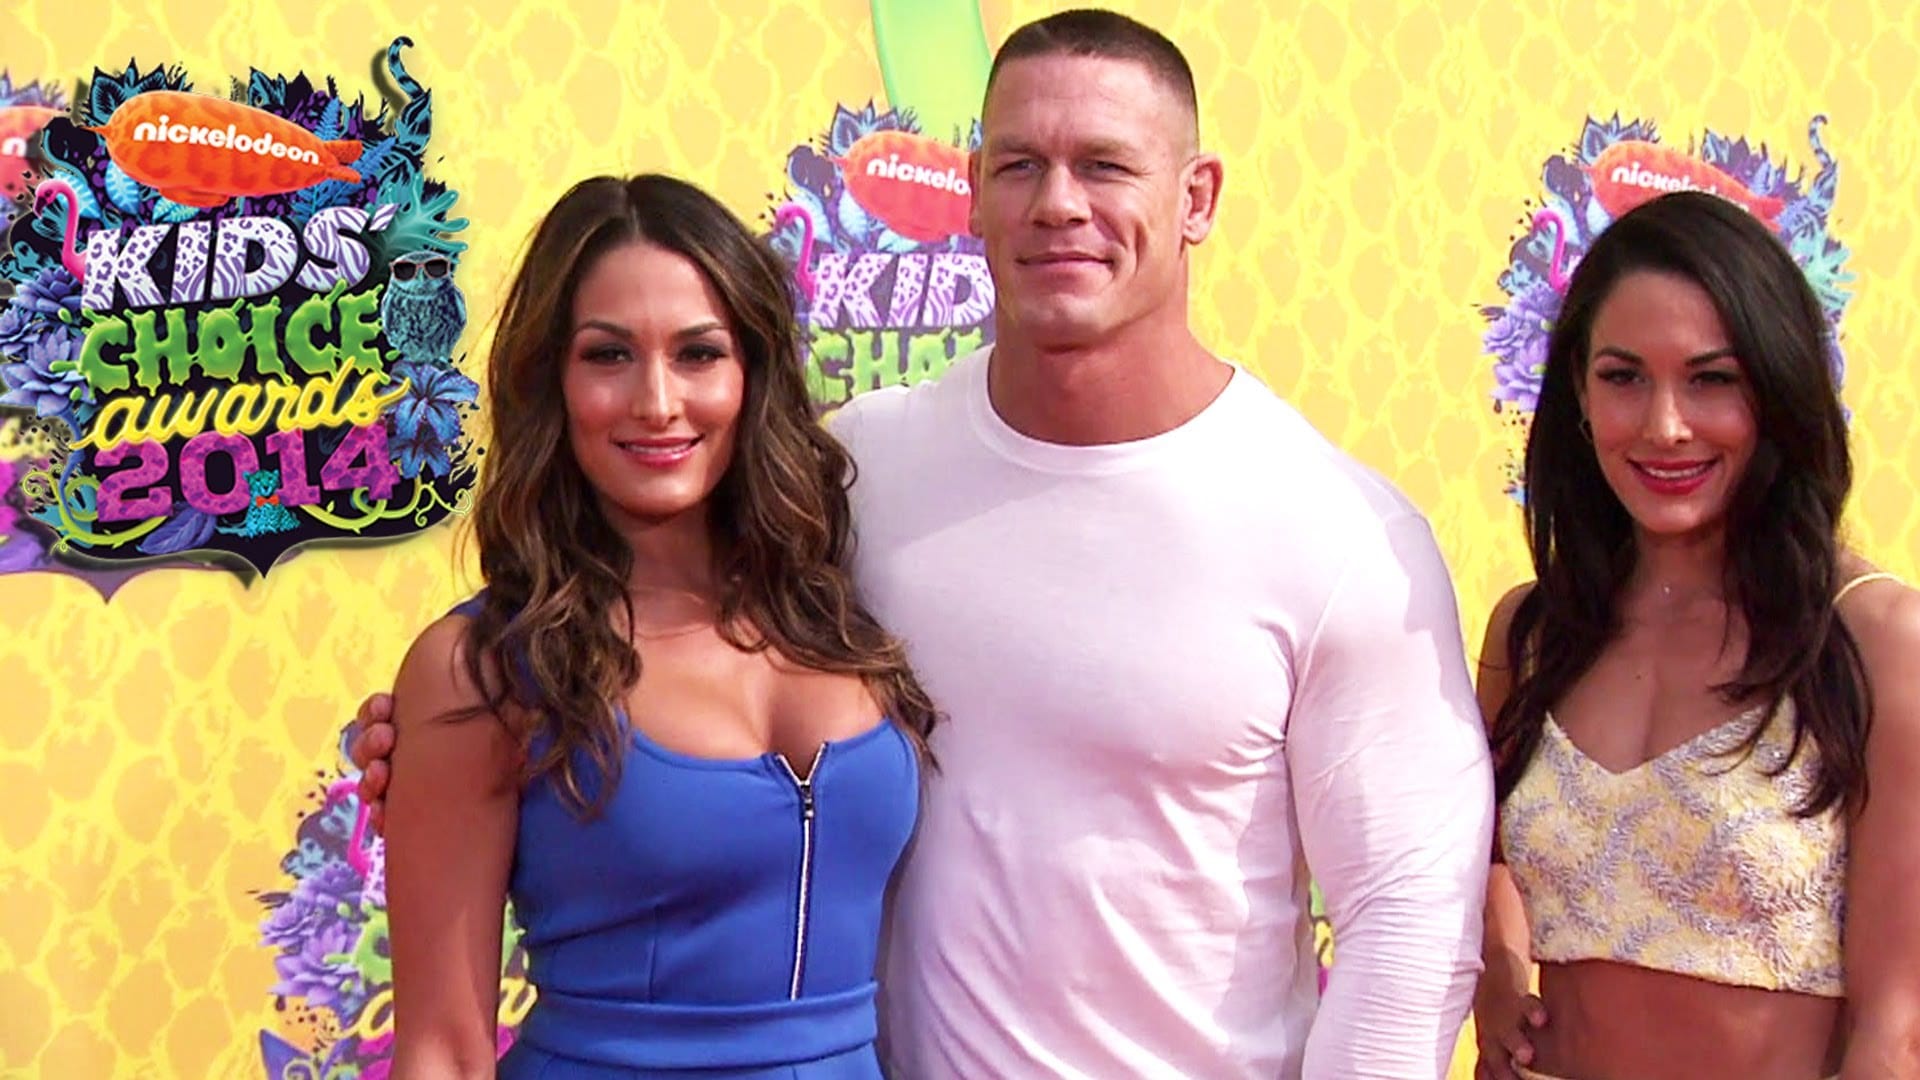 Brie Bella Sets The Record Straight On How She Feels About John Cena & Nikki Bella Break-Up